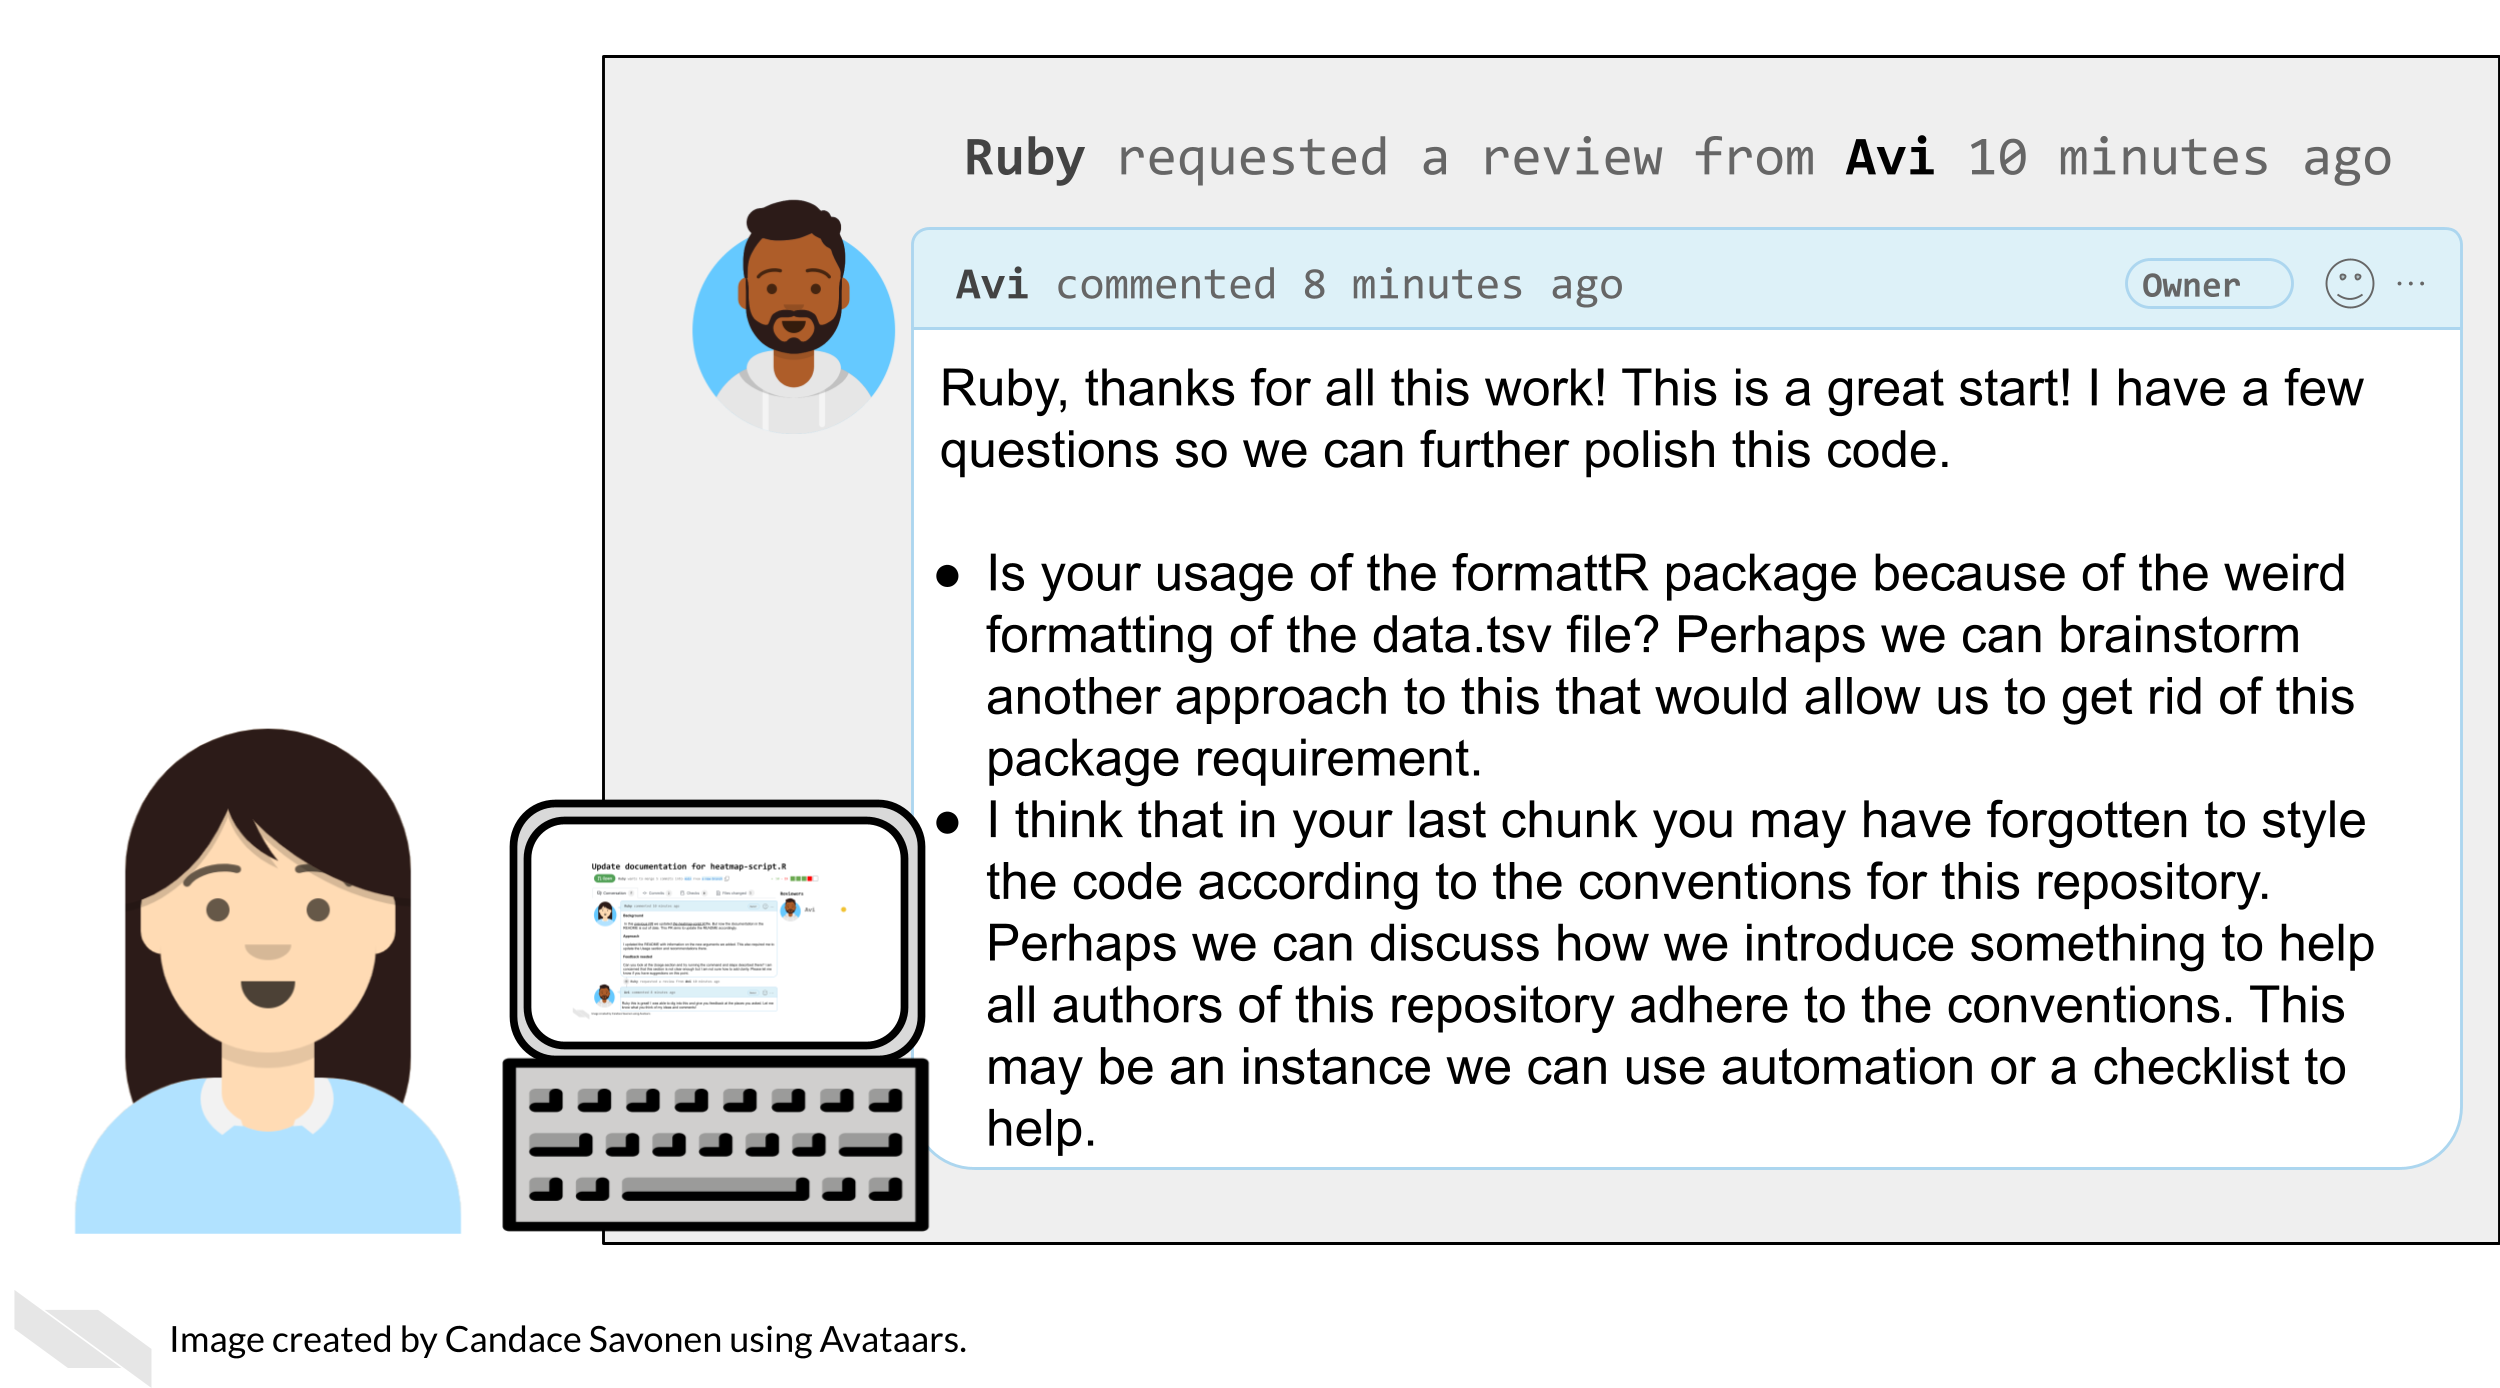 Ruby has requested a review from Avi but alternatively, Avi has framed his review in a more effective manner, giving context, examples, and creating a much more positive collaboration. Avi’s review says: Ruby, thanks for all this work! This is a great start! I have a few questions so we can further polish this code. Is your usage of the formattR package because of the weird formatting of the data.tsv file? Perhaps we can brainstorm another approach to this that would allow us to get rid of this package requirement. I think that in your last chunk you may have forgotten to style the code according to the conventions for this repository. Perhaps we can discuss how we introduce something to help all authors of this repository adhere to the conventions. This may be an instance we can use automation or a checklist to help. Ruby happily accepts this review and the collaboration will create a better product.